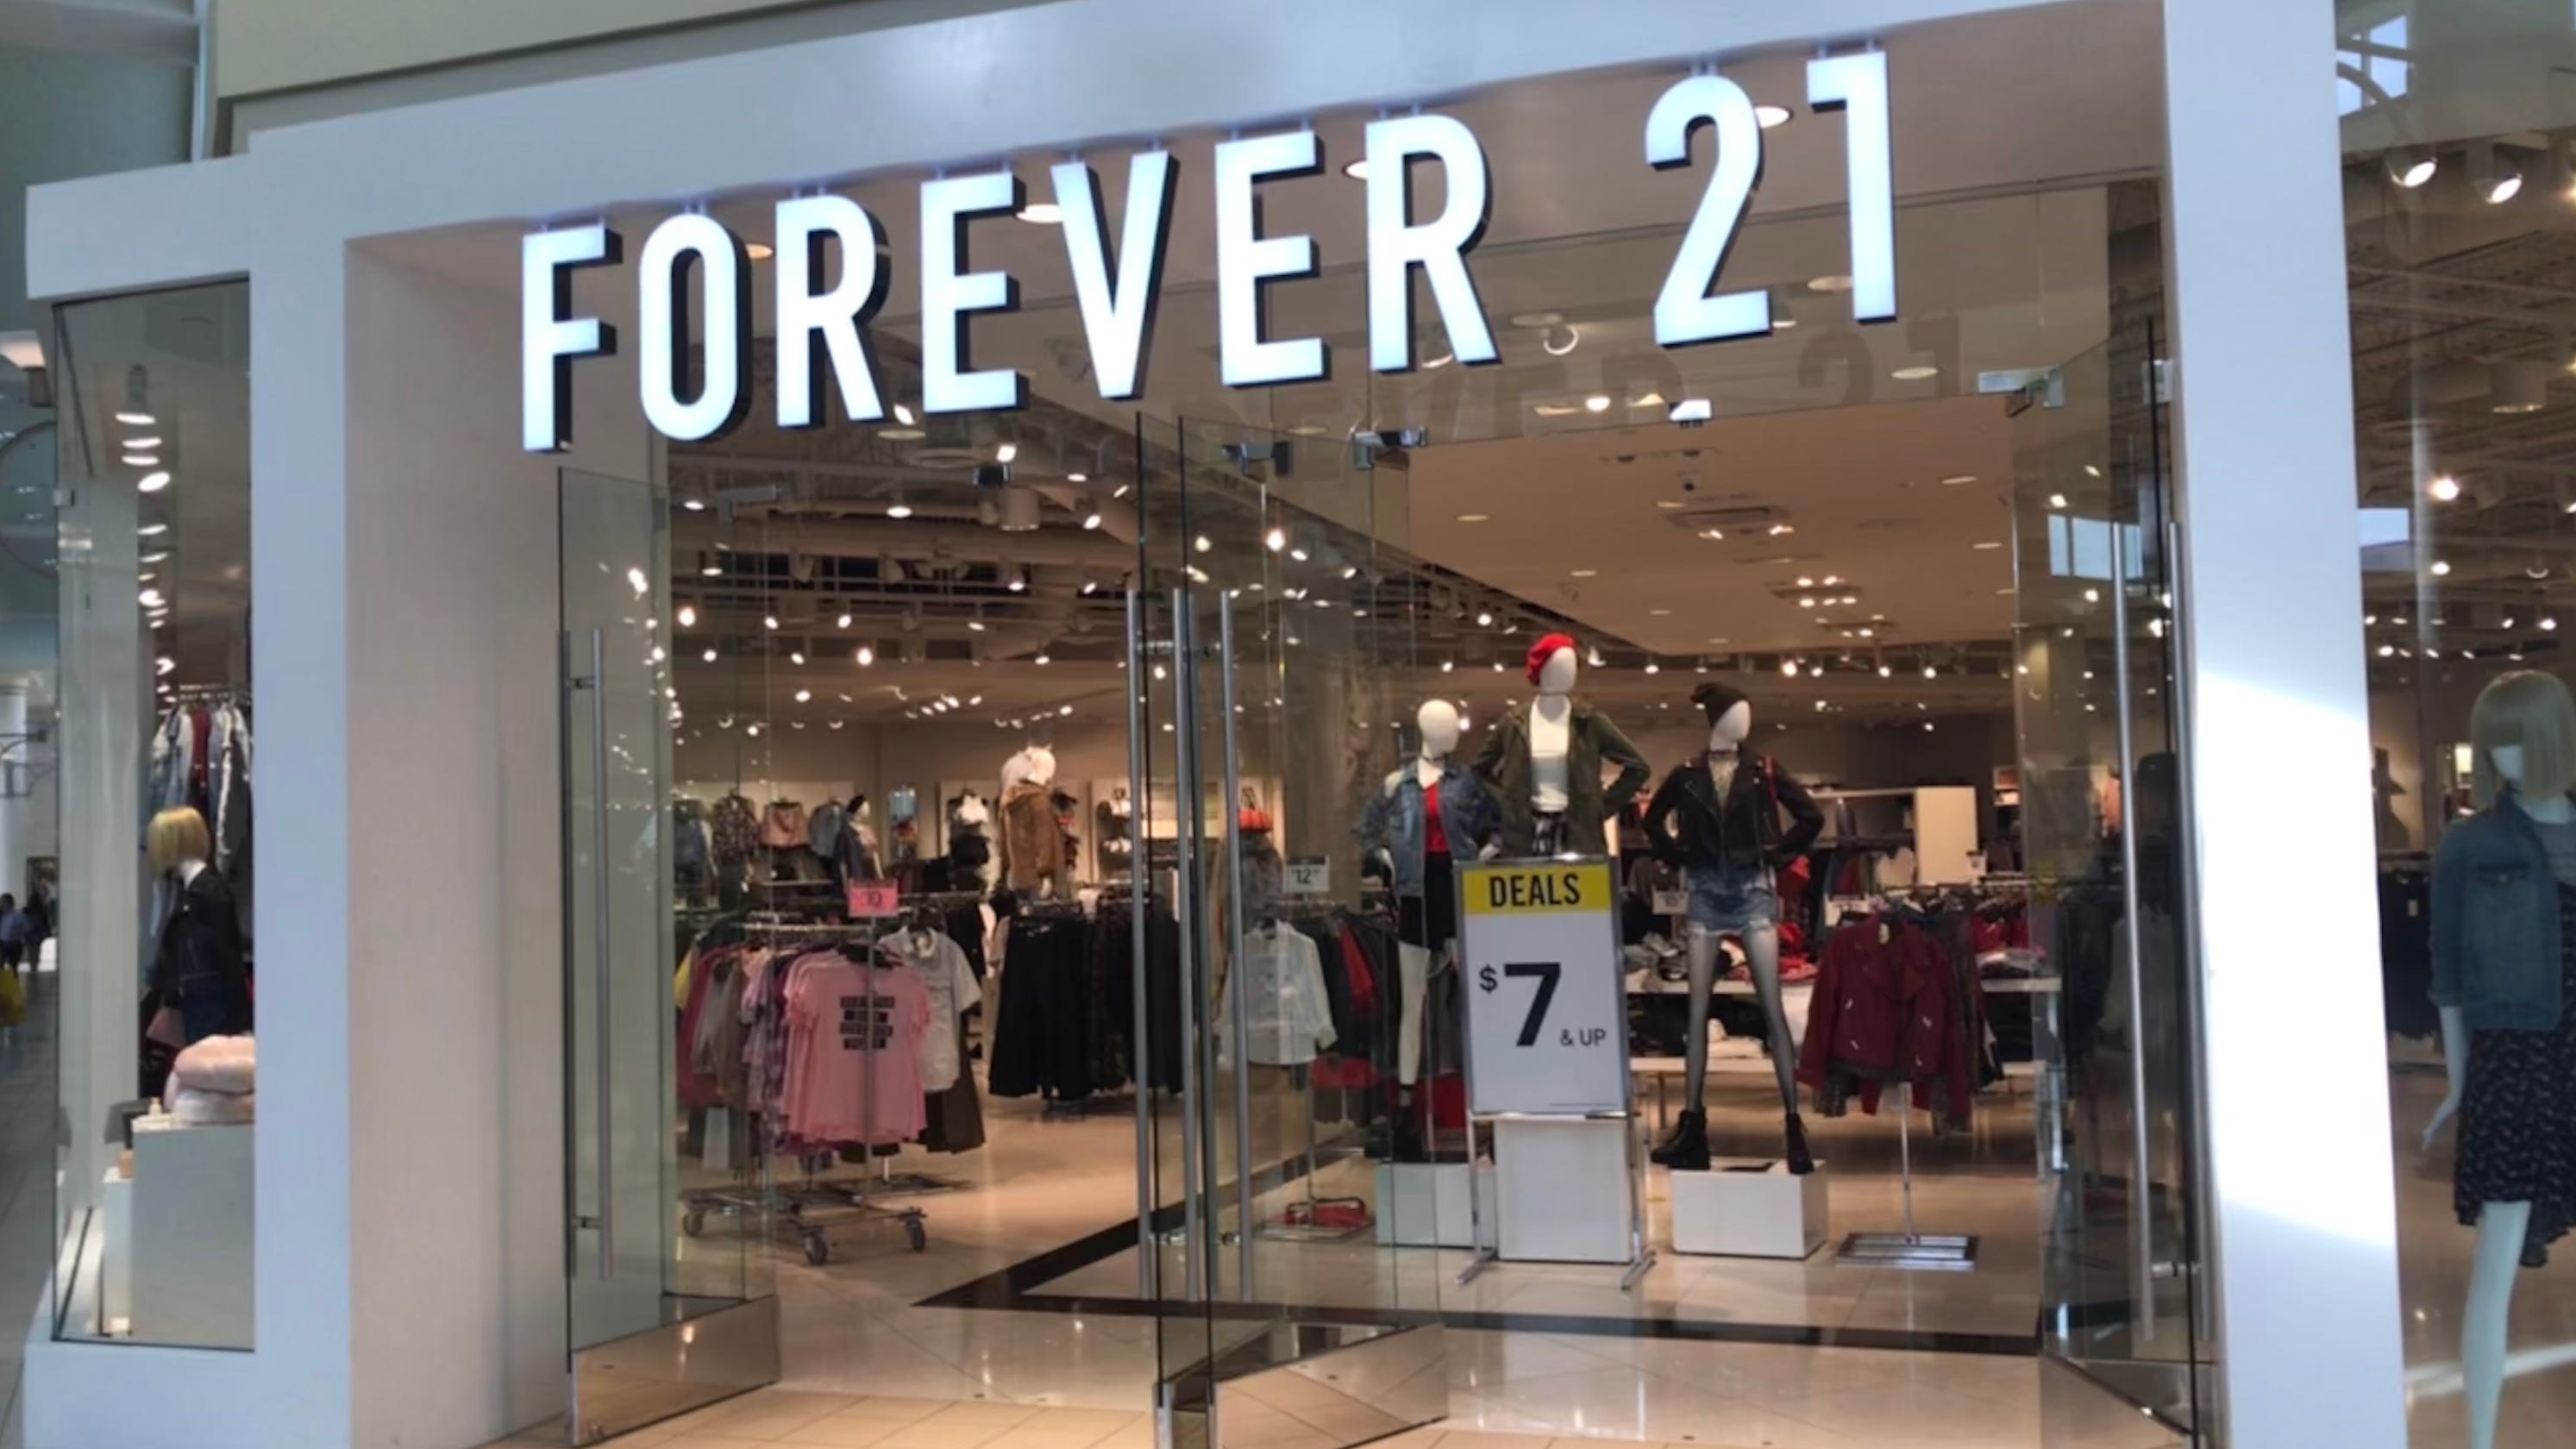 The Death of Retail Forever 21 Petitions for Bankruptcy The State Times